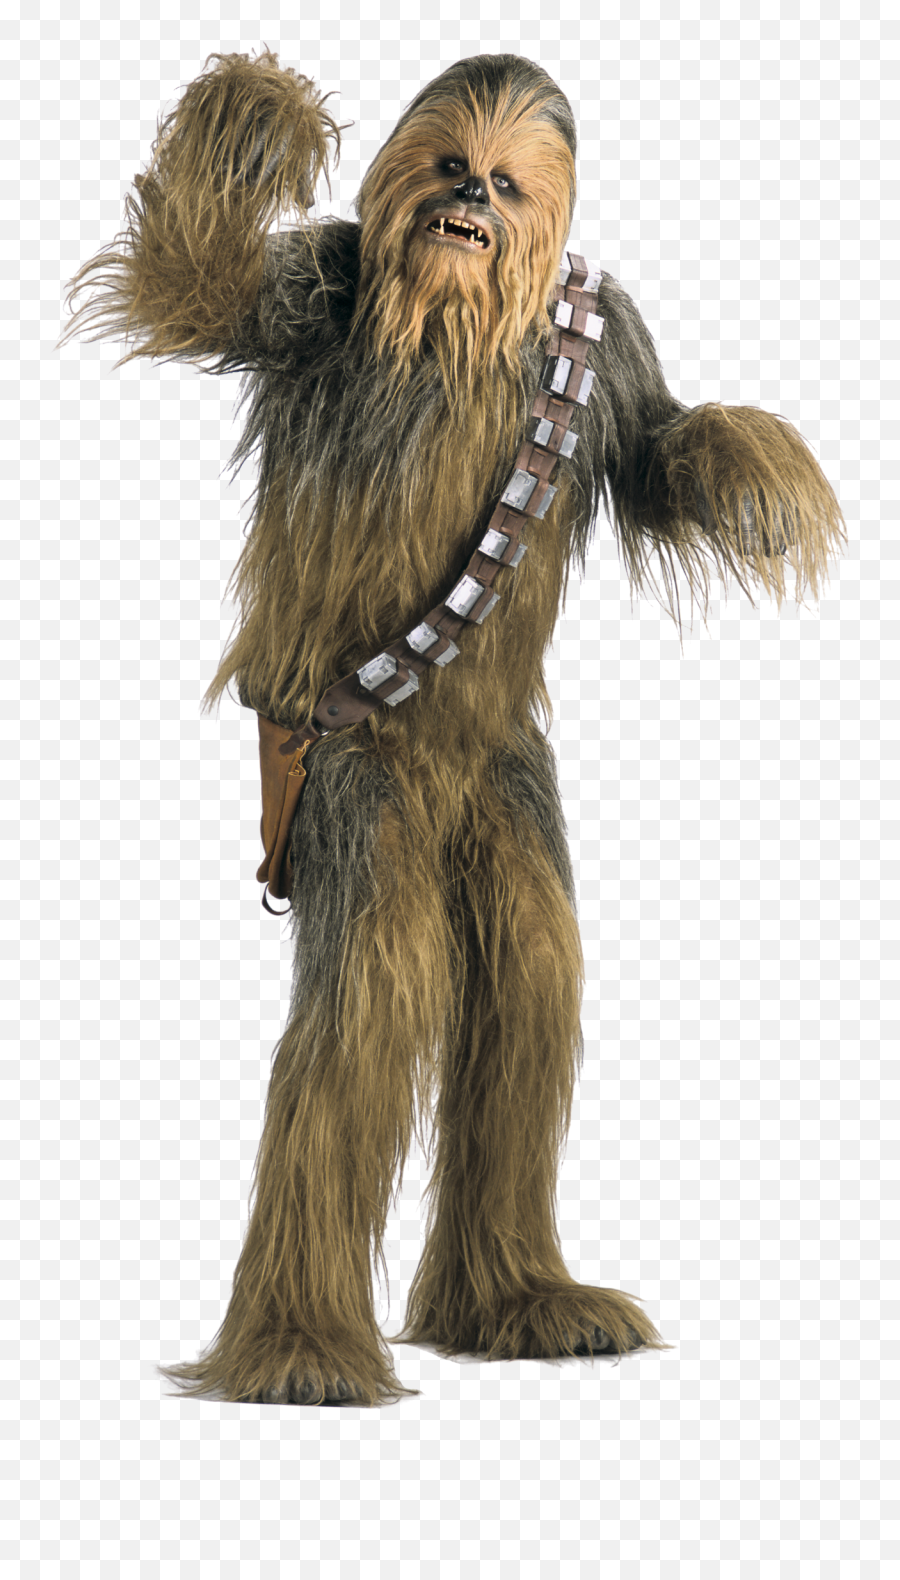 Chewbacca Svg Transparent Png Clipart - Star Wars Chewbacca Png Emoji,Chewbacca Emoji